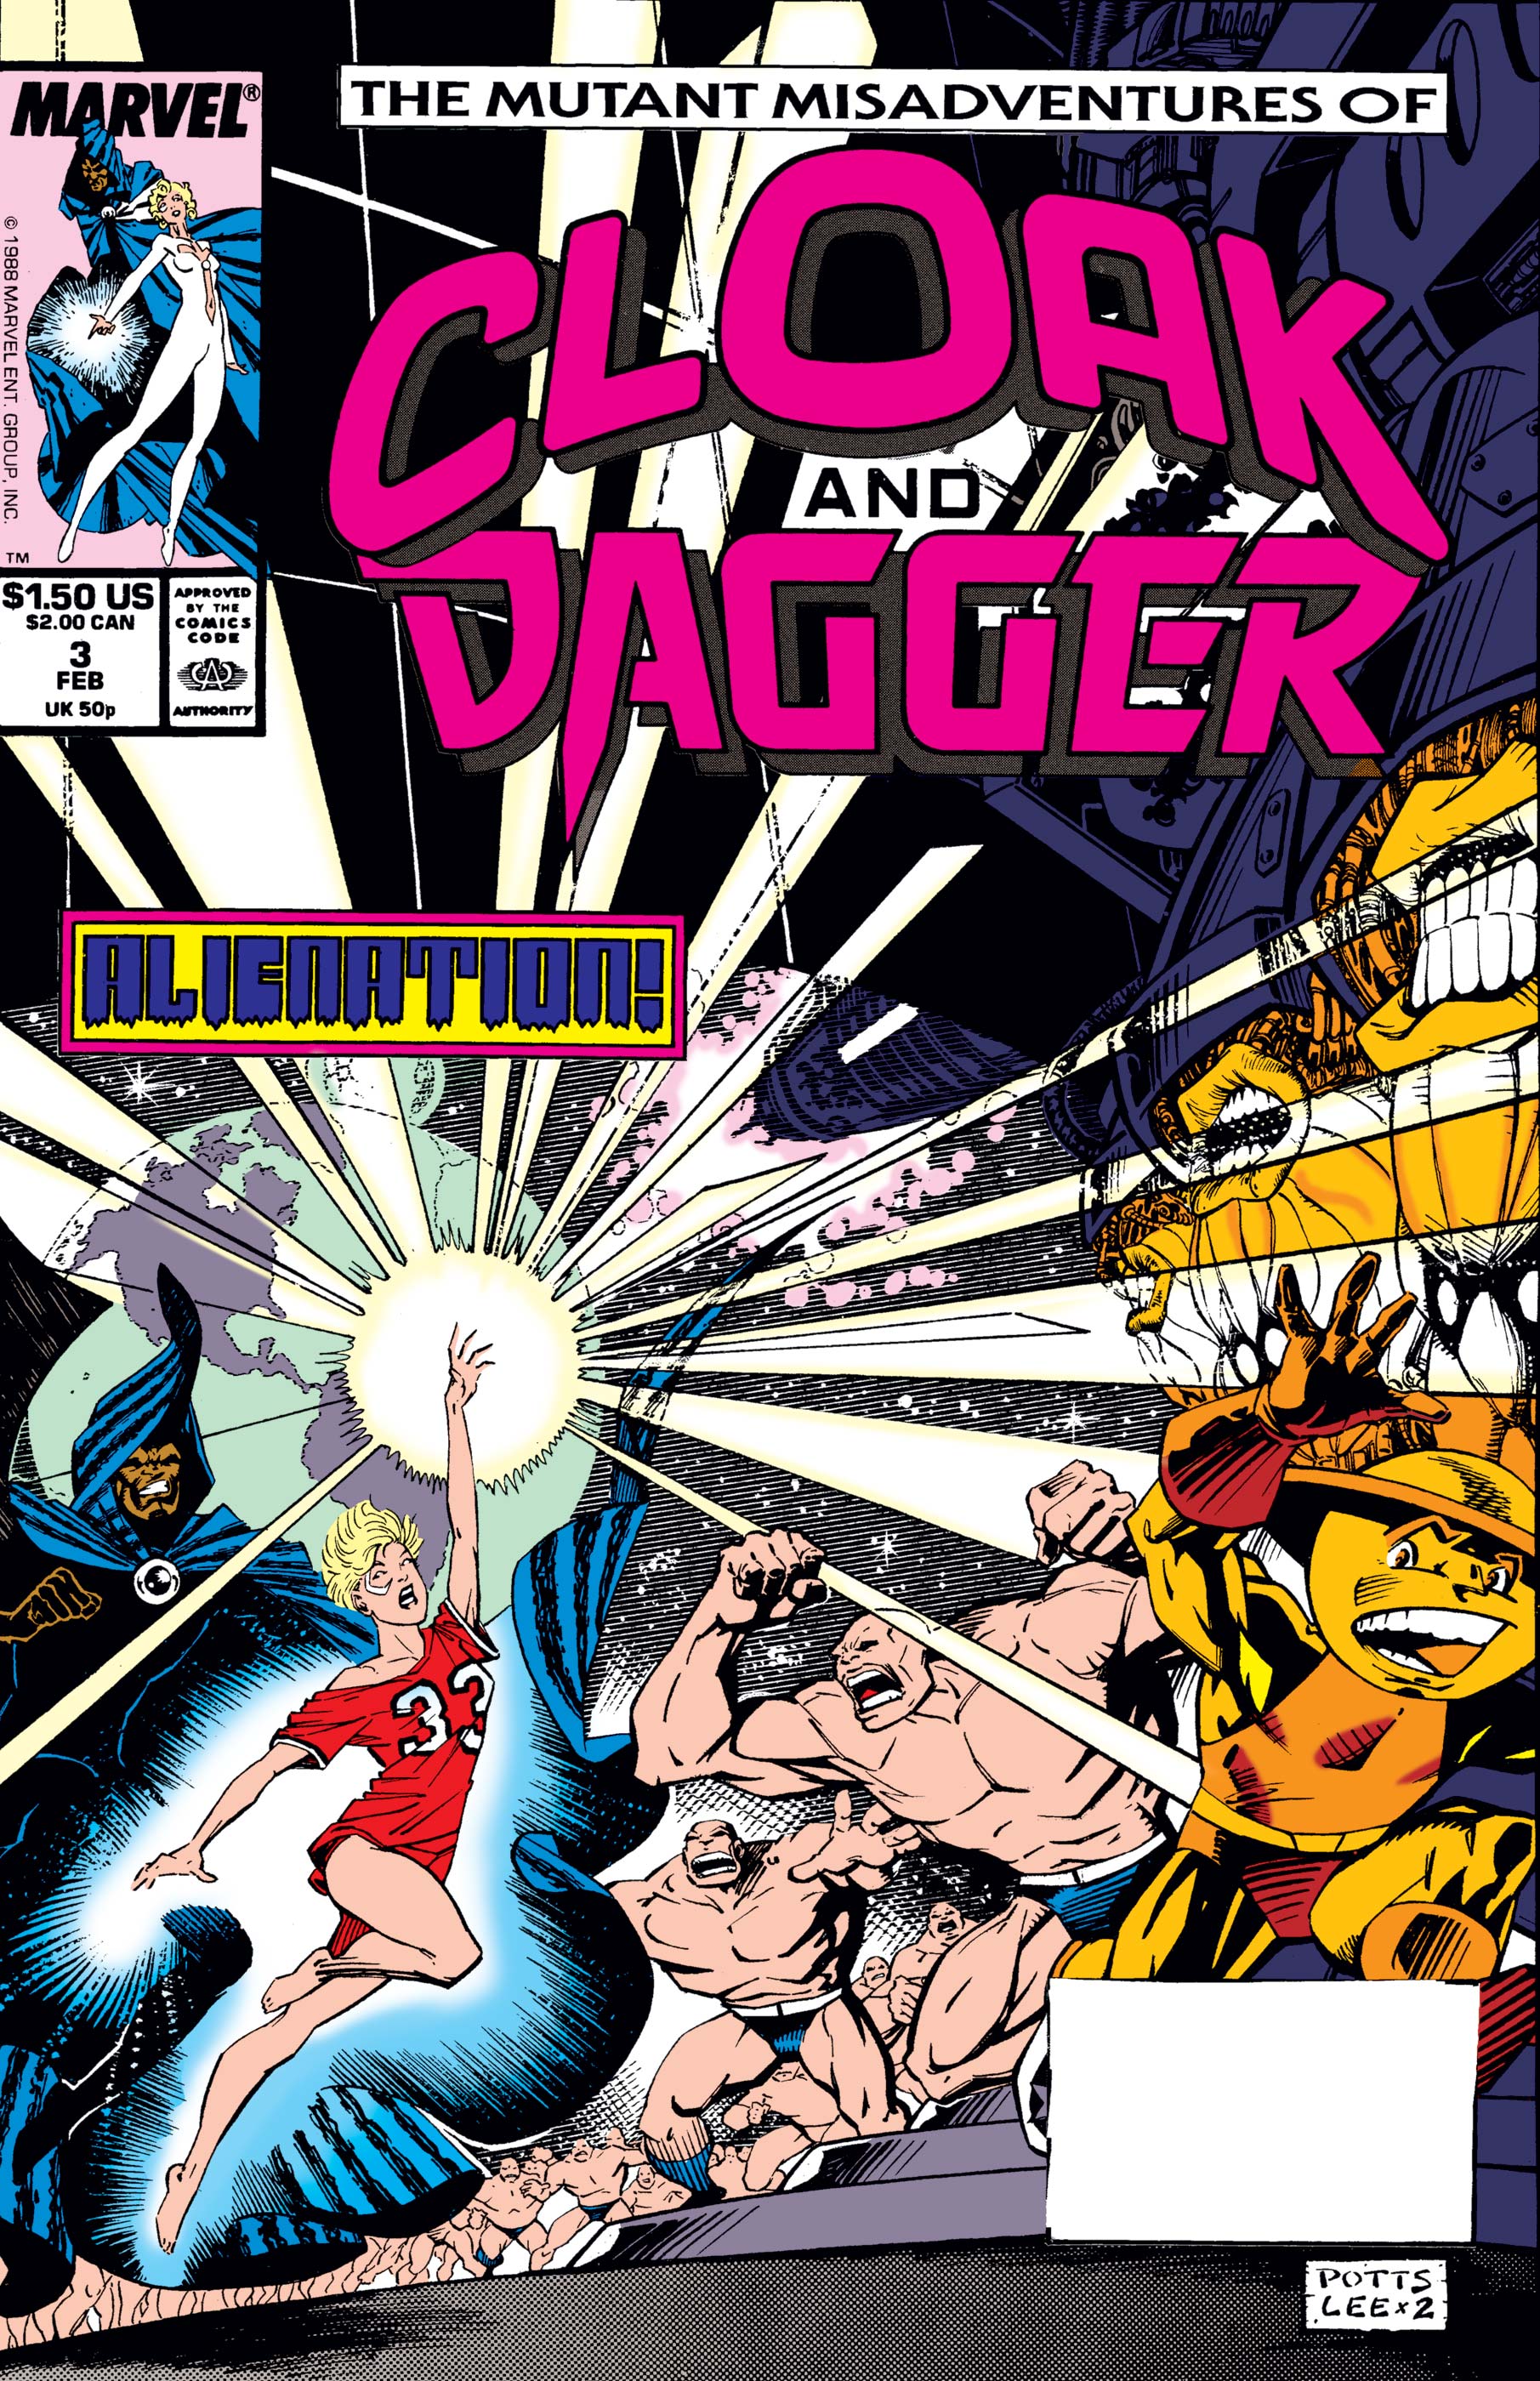 The Mutant Misadventures of Cloak and Dagger (1988) #3